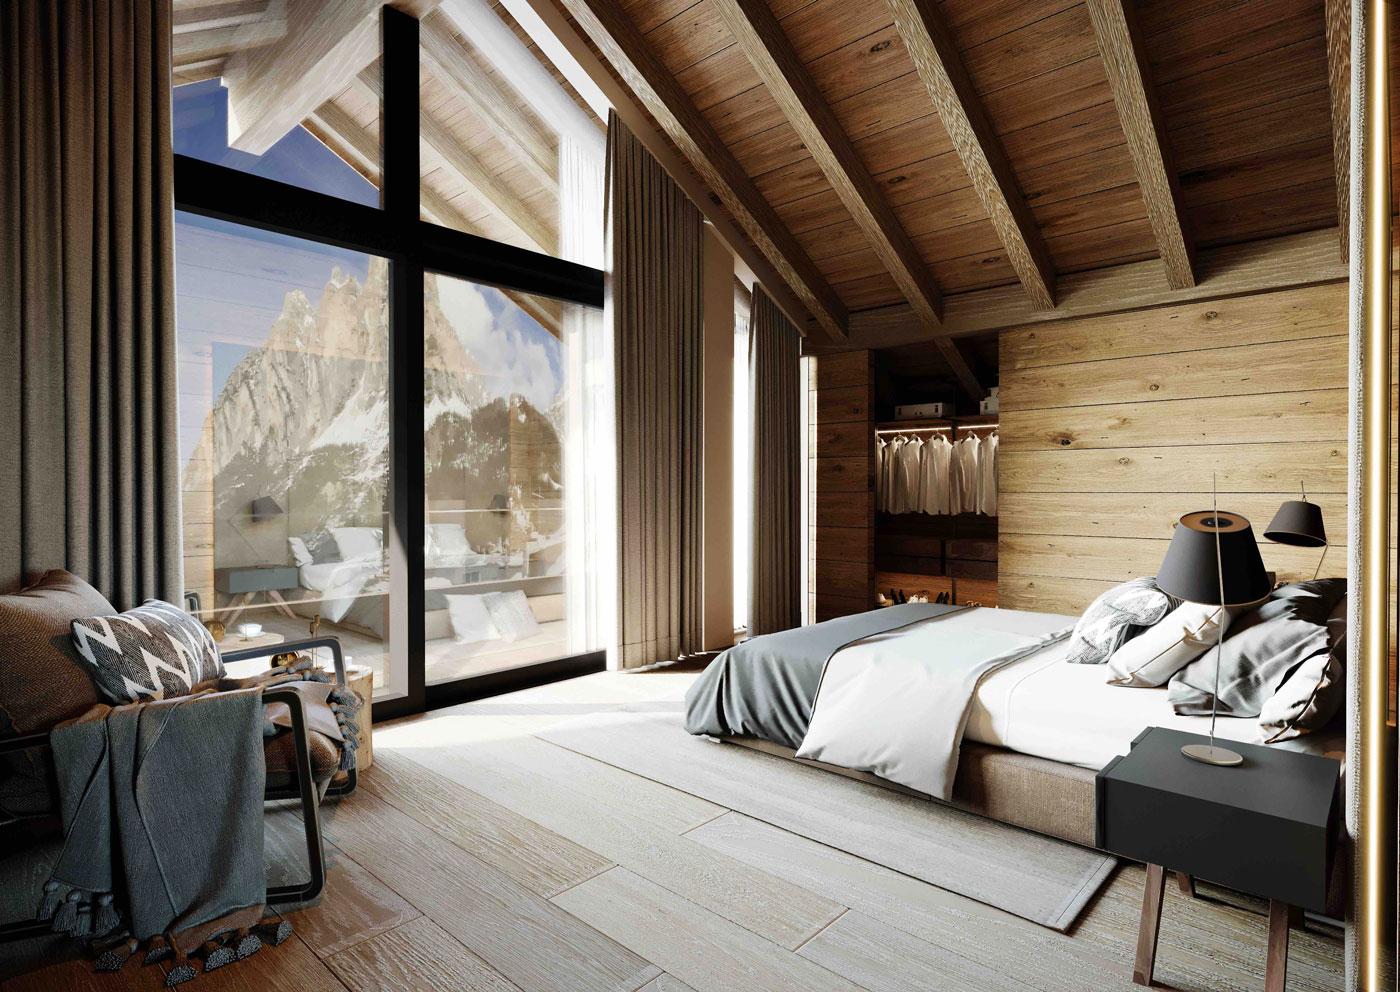 Chalet Valbuna, Luxury Chalet Penthouse in Corvara in Badia, in the Dolomites • South Tyrol, Italy | Tirelli & Partners • Finest Residences